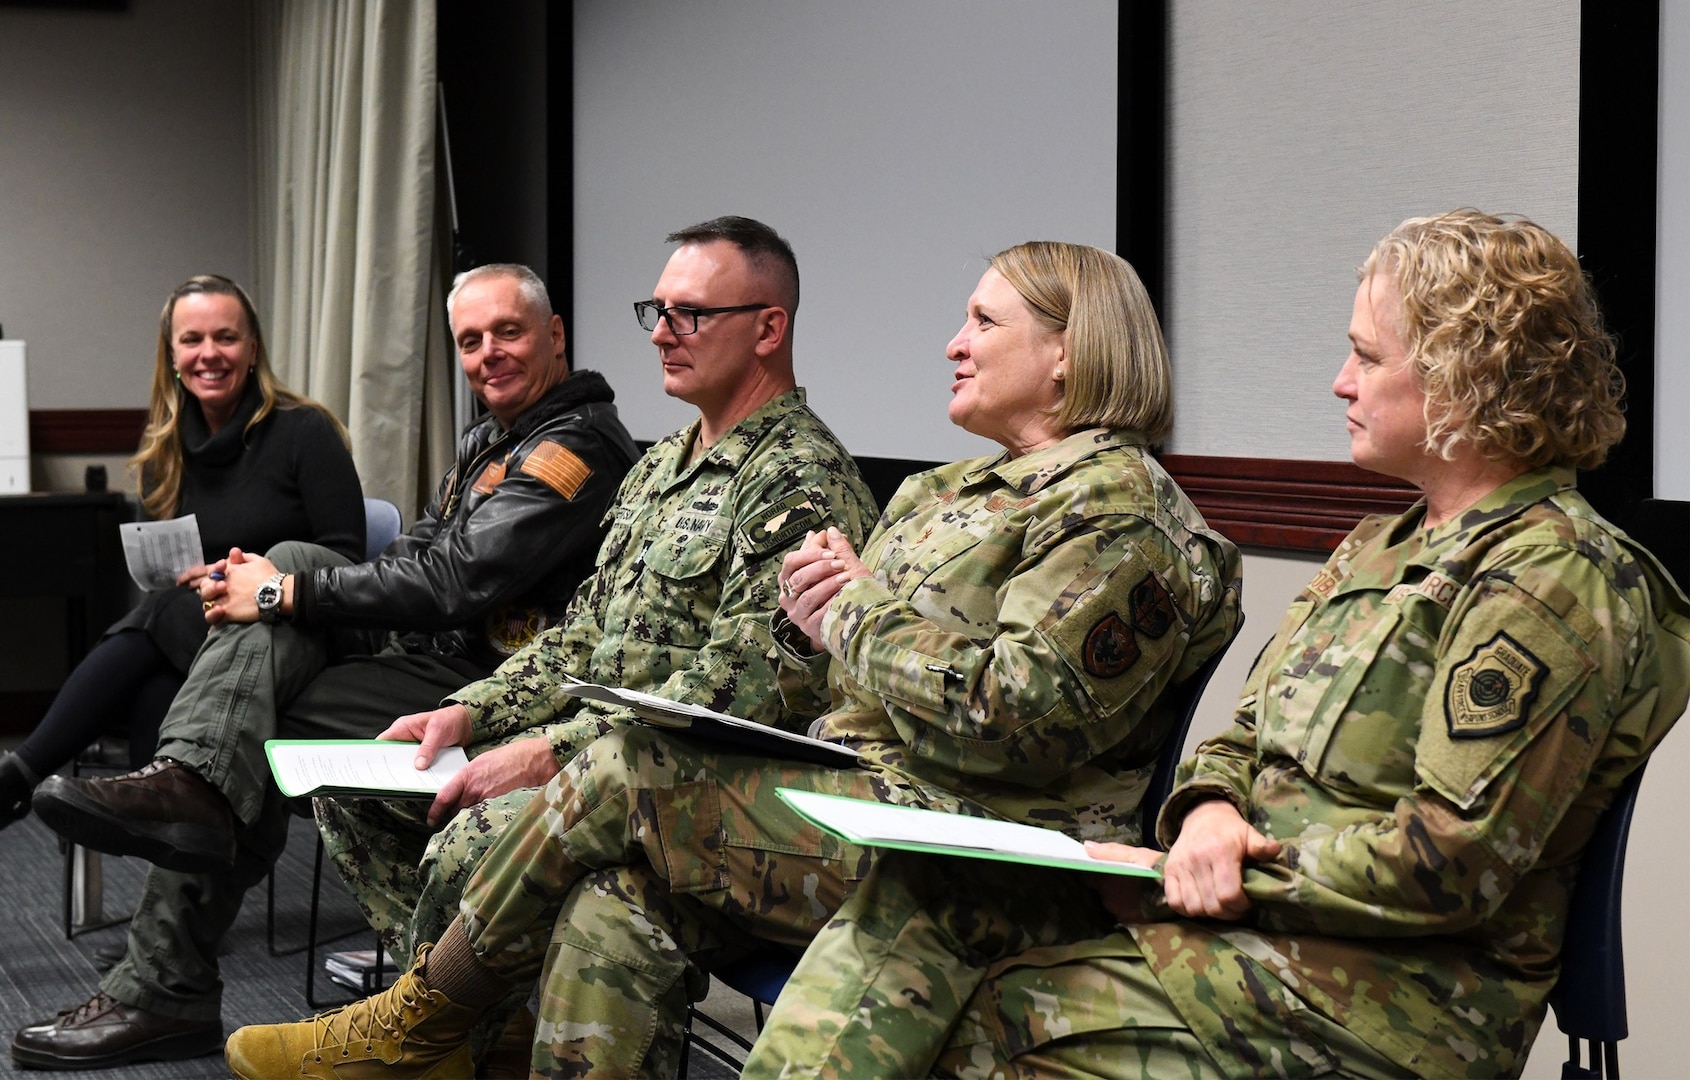 Last week, U.S. Northern Command and U.S. Space Command teamed up with  The Joint Staff to train gender focal points (GFPs) from both commands on how to implement Women, Peace and Security across missions such as security cooperation, defense support of civil authorities, and military exercises